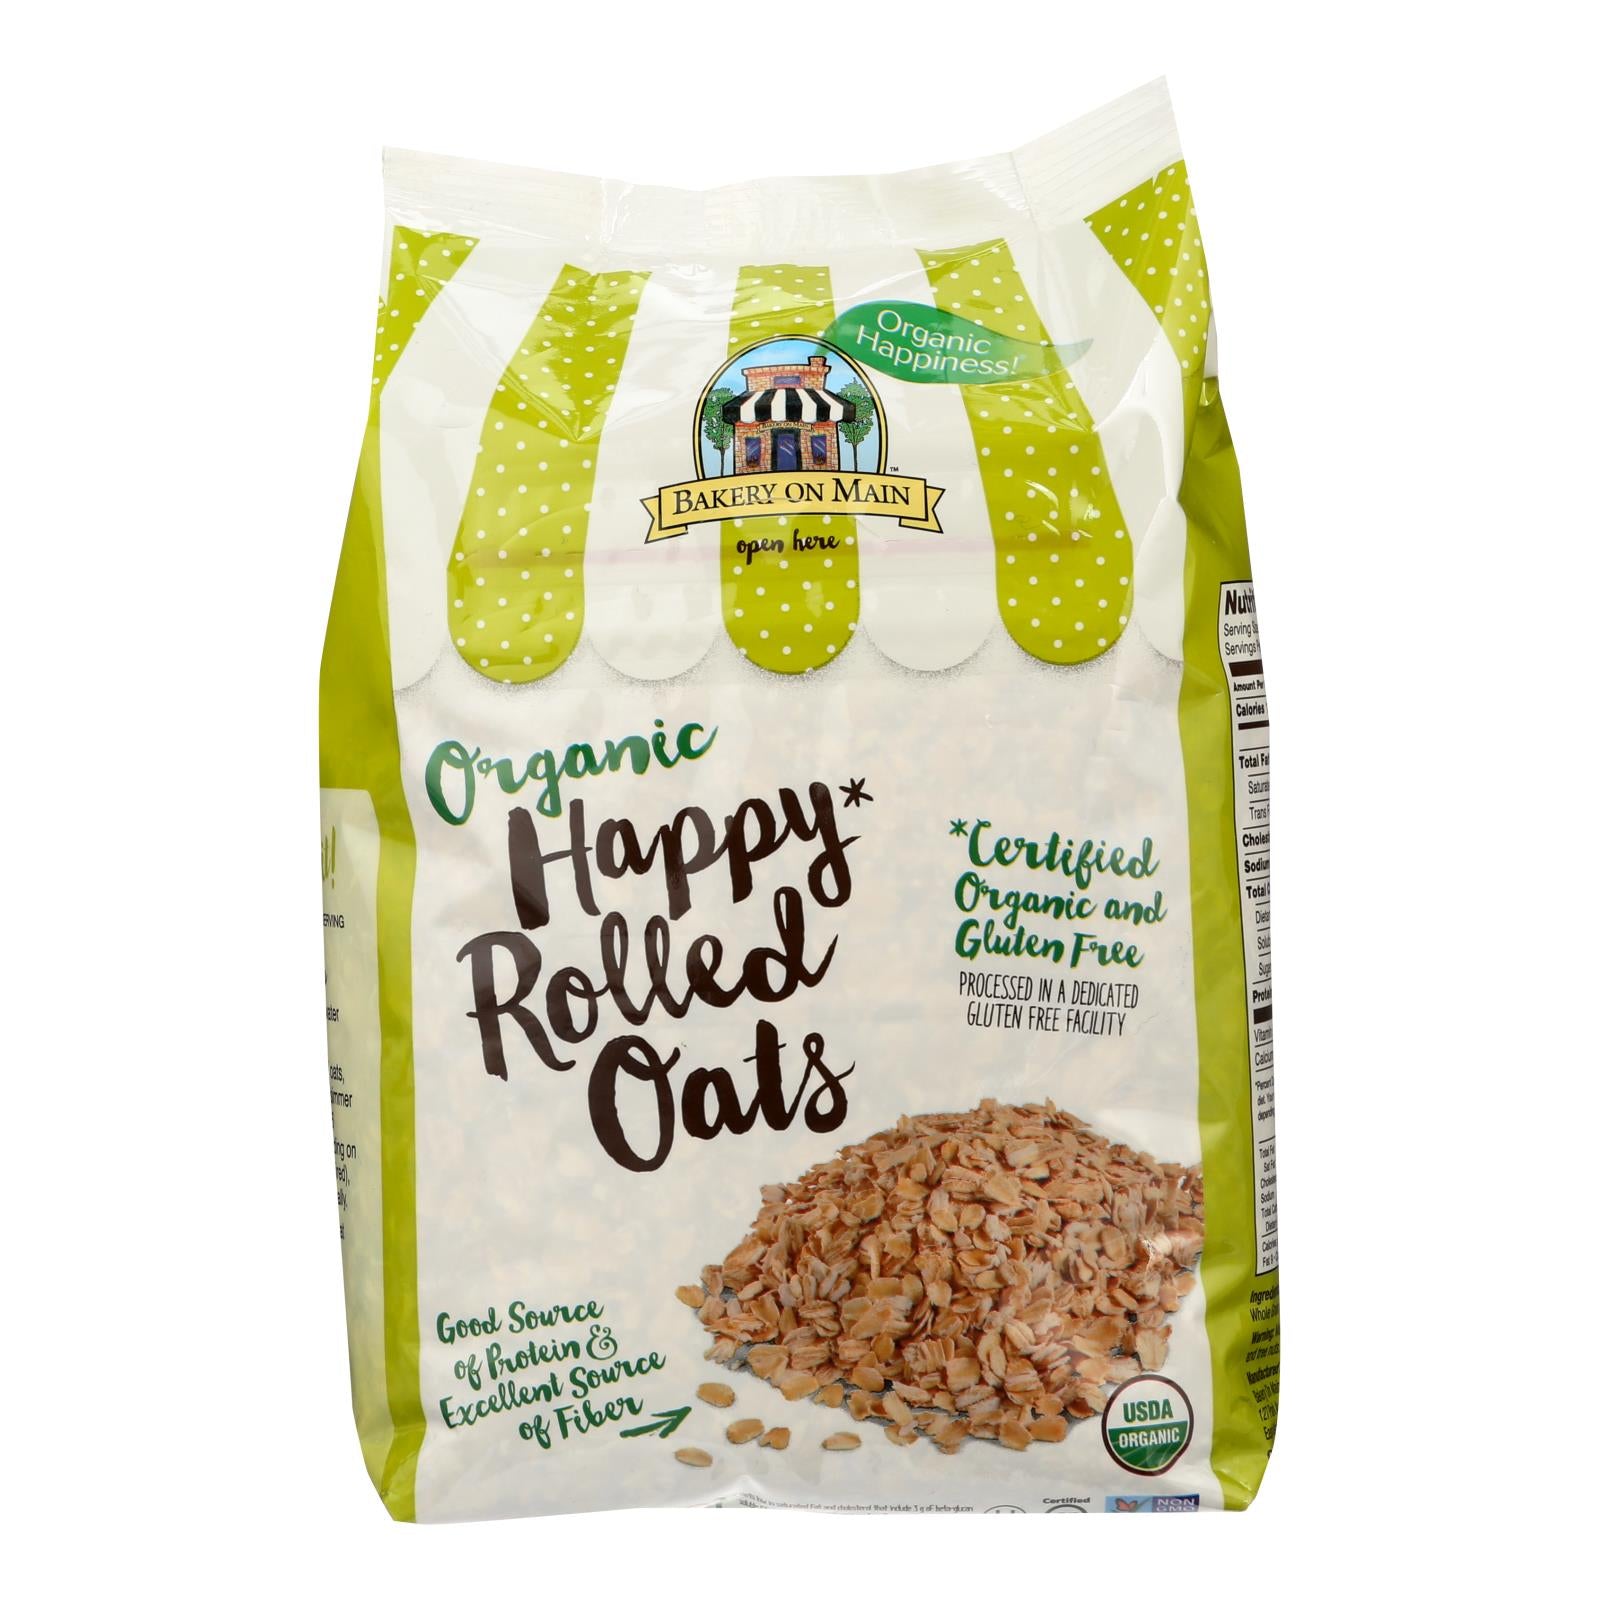 Bakery On Main, Bakery On Main Organic Happy Rolled Oats - Gluten Free - Case of 4 - 24 oz (Pack of 4)